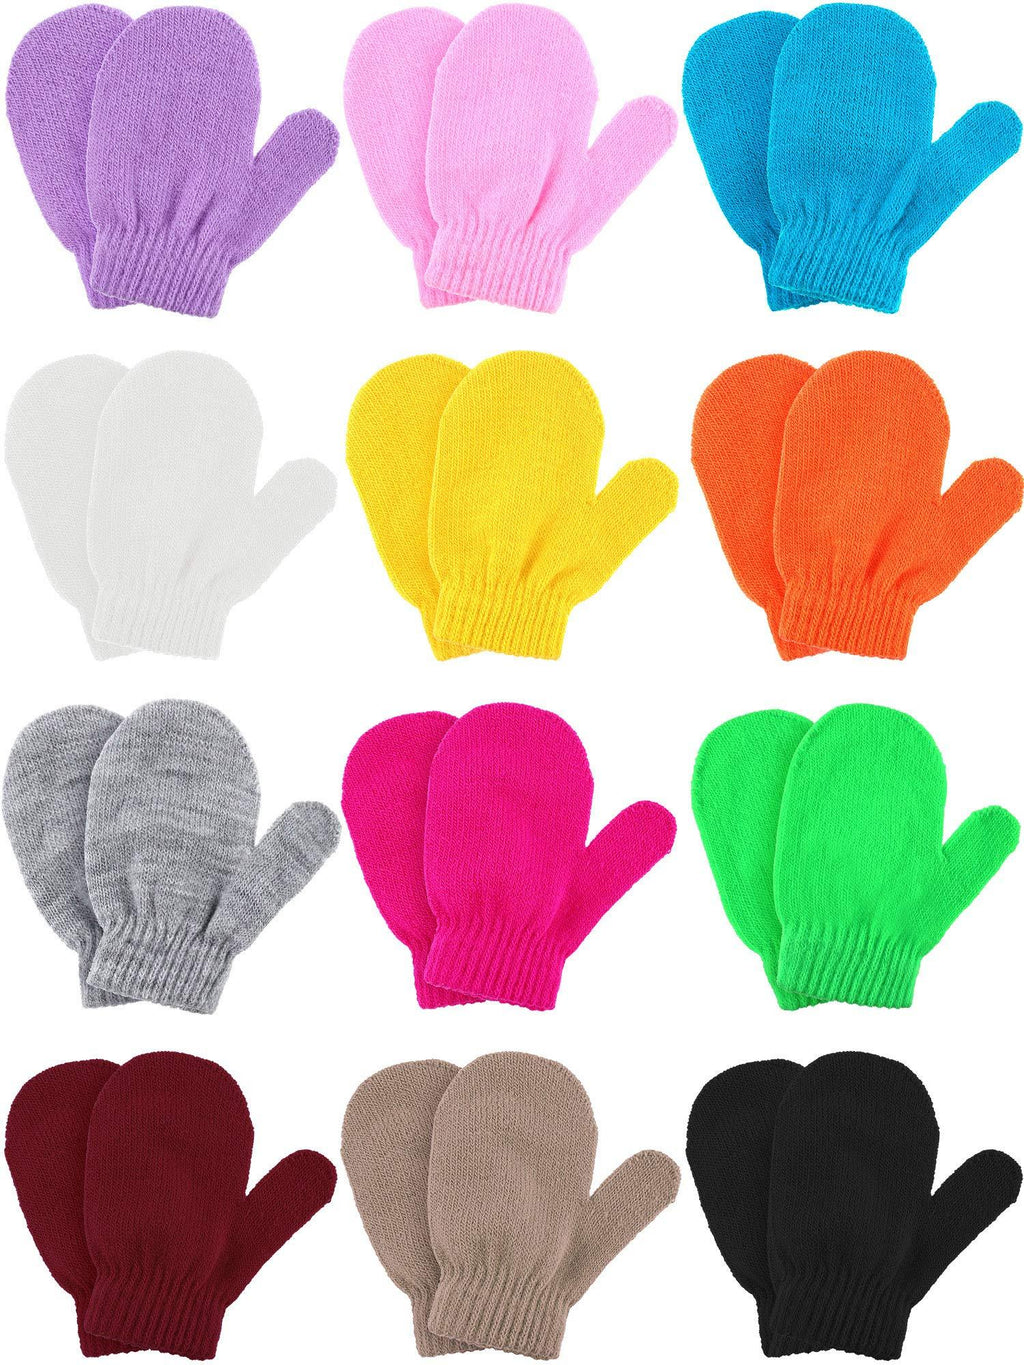 [Australia] - Boao 12 Pairs Stretch Full Finger Mittens Knitted Gloves Winter Warm Knitted Magic Mittens for Kids Supplies Black, Khaki, Camel and Mixed Candy Color 